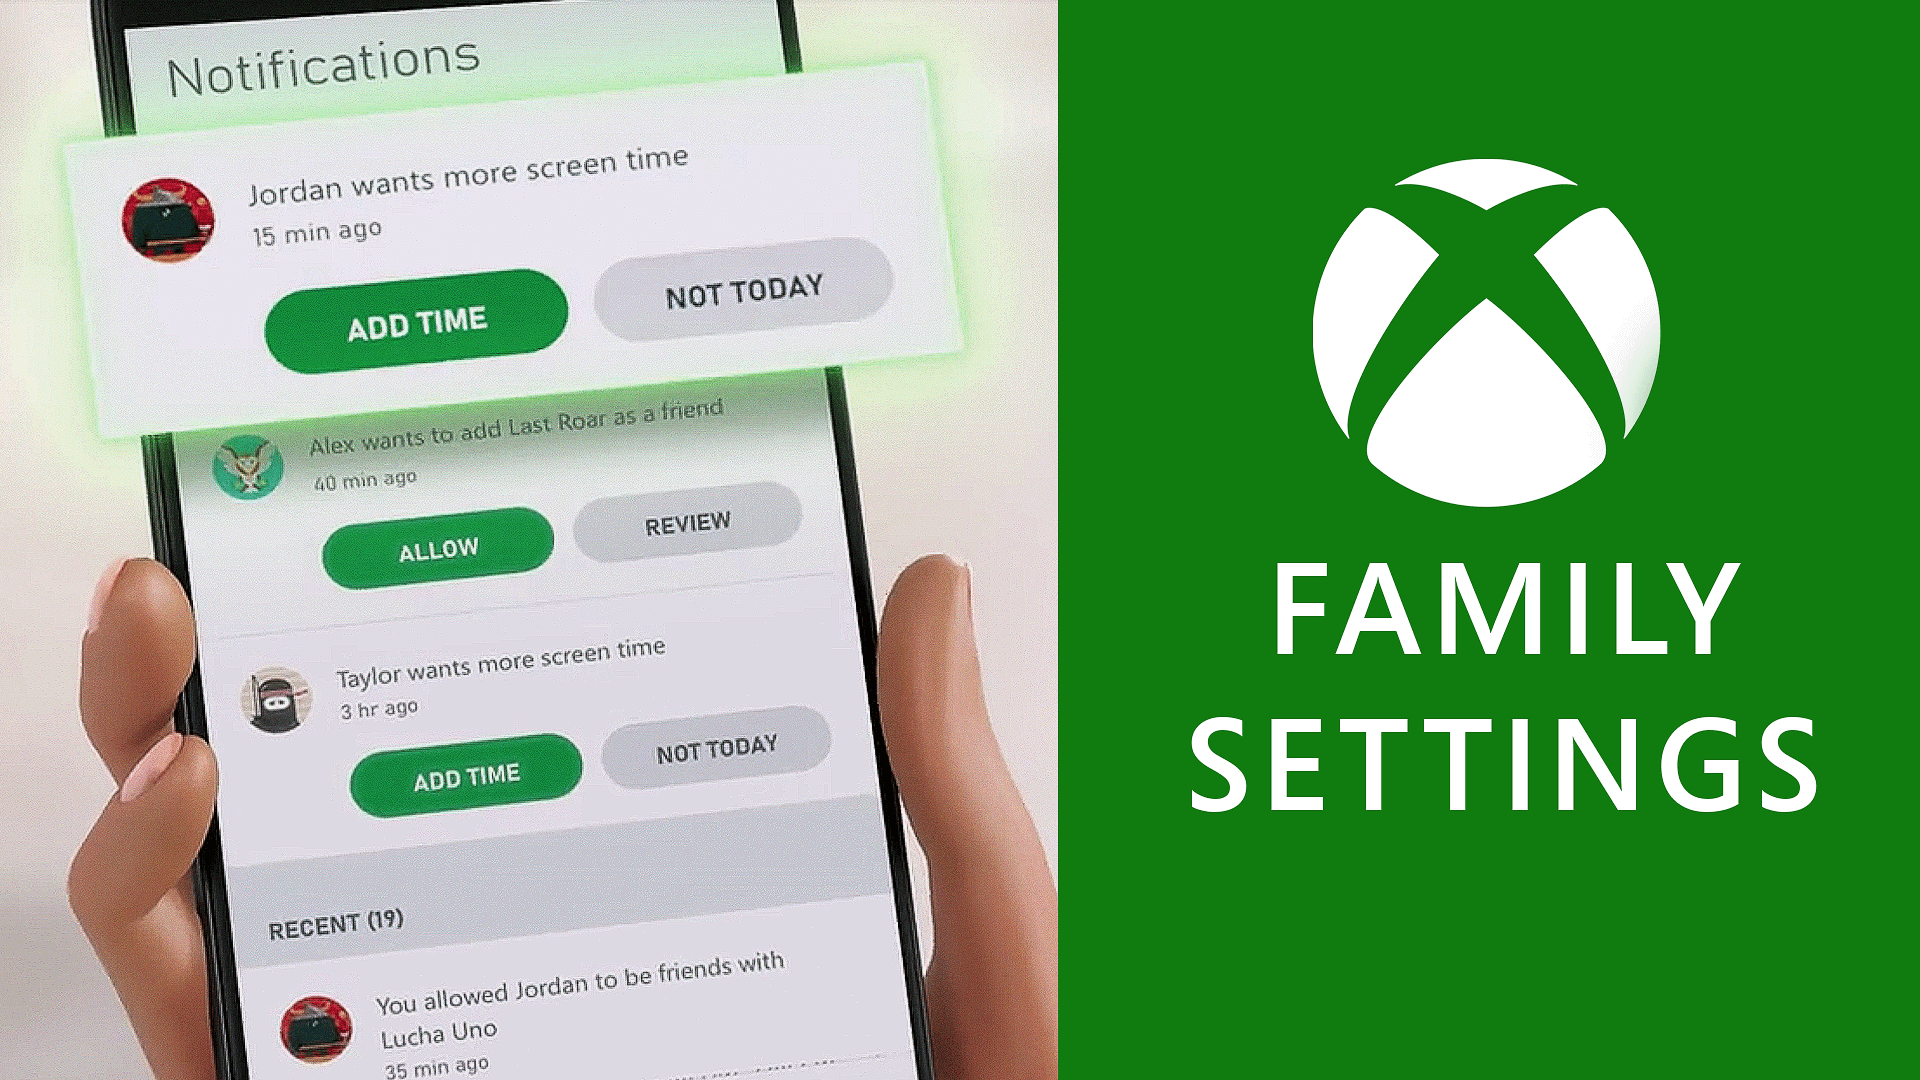 Video For Xbox Family Settings App Available Now on iOS and Android to Help Manage Children’s Gaming